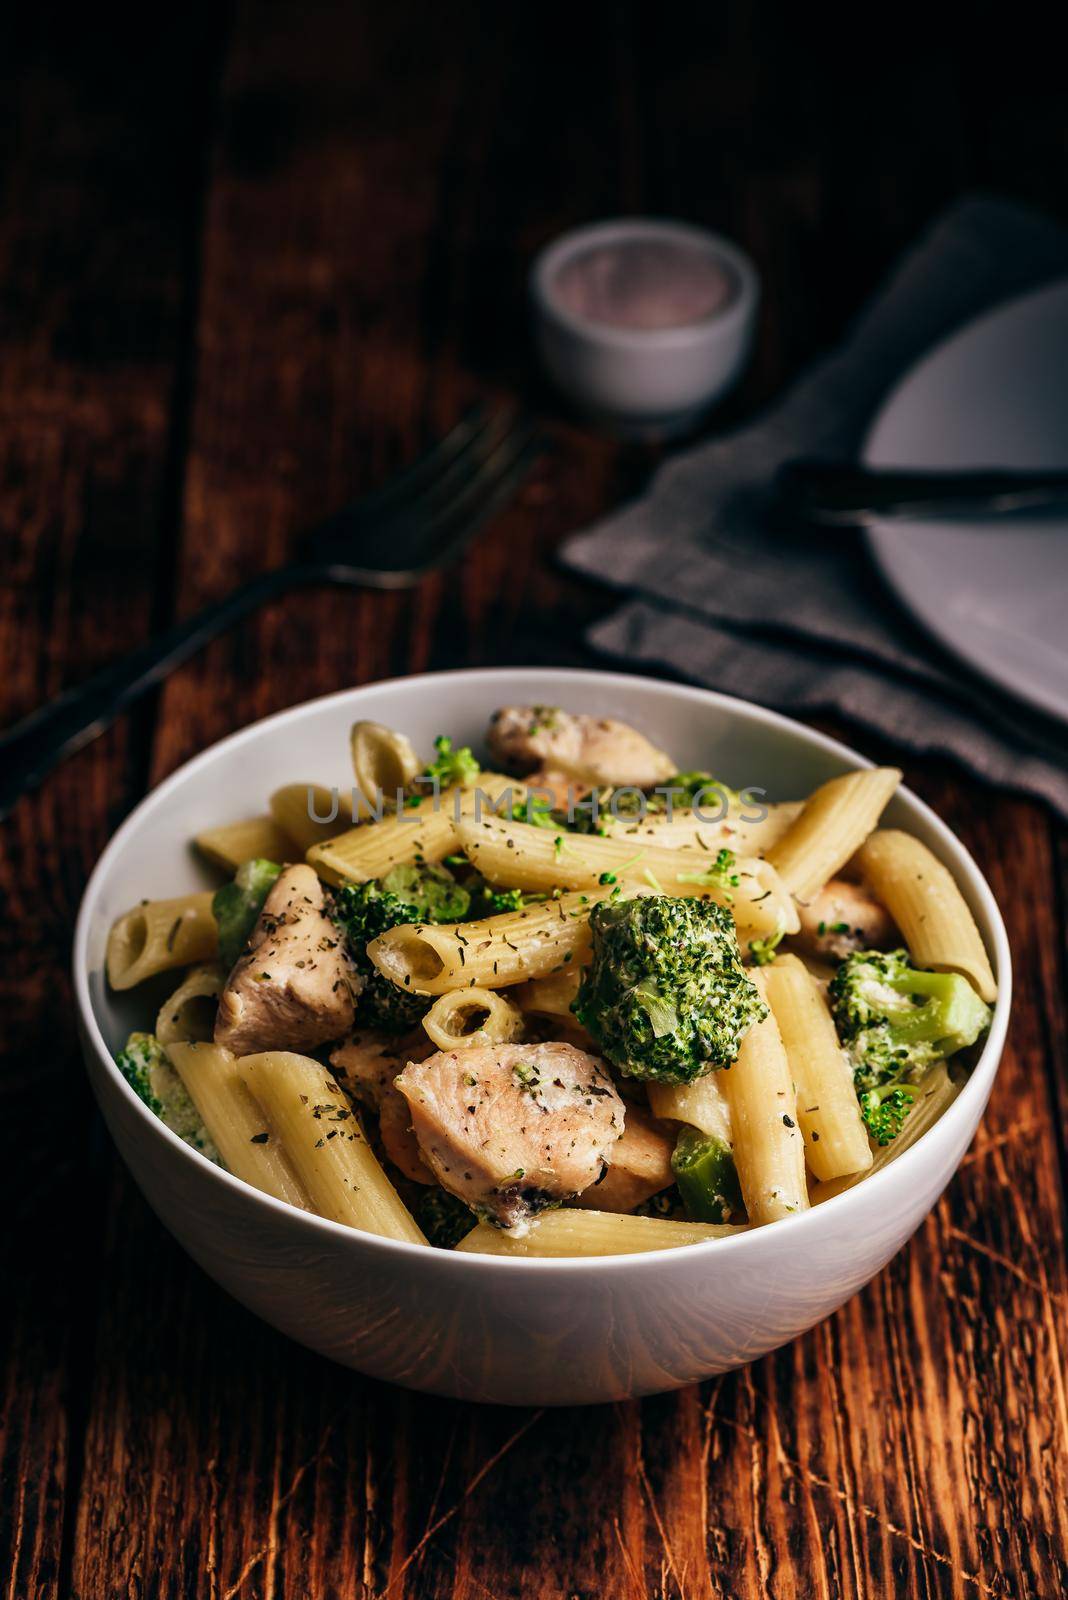 Pasta with chicken and broccoli by Seva_blsv